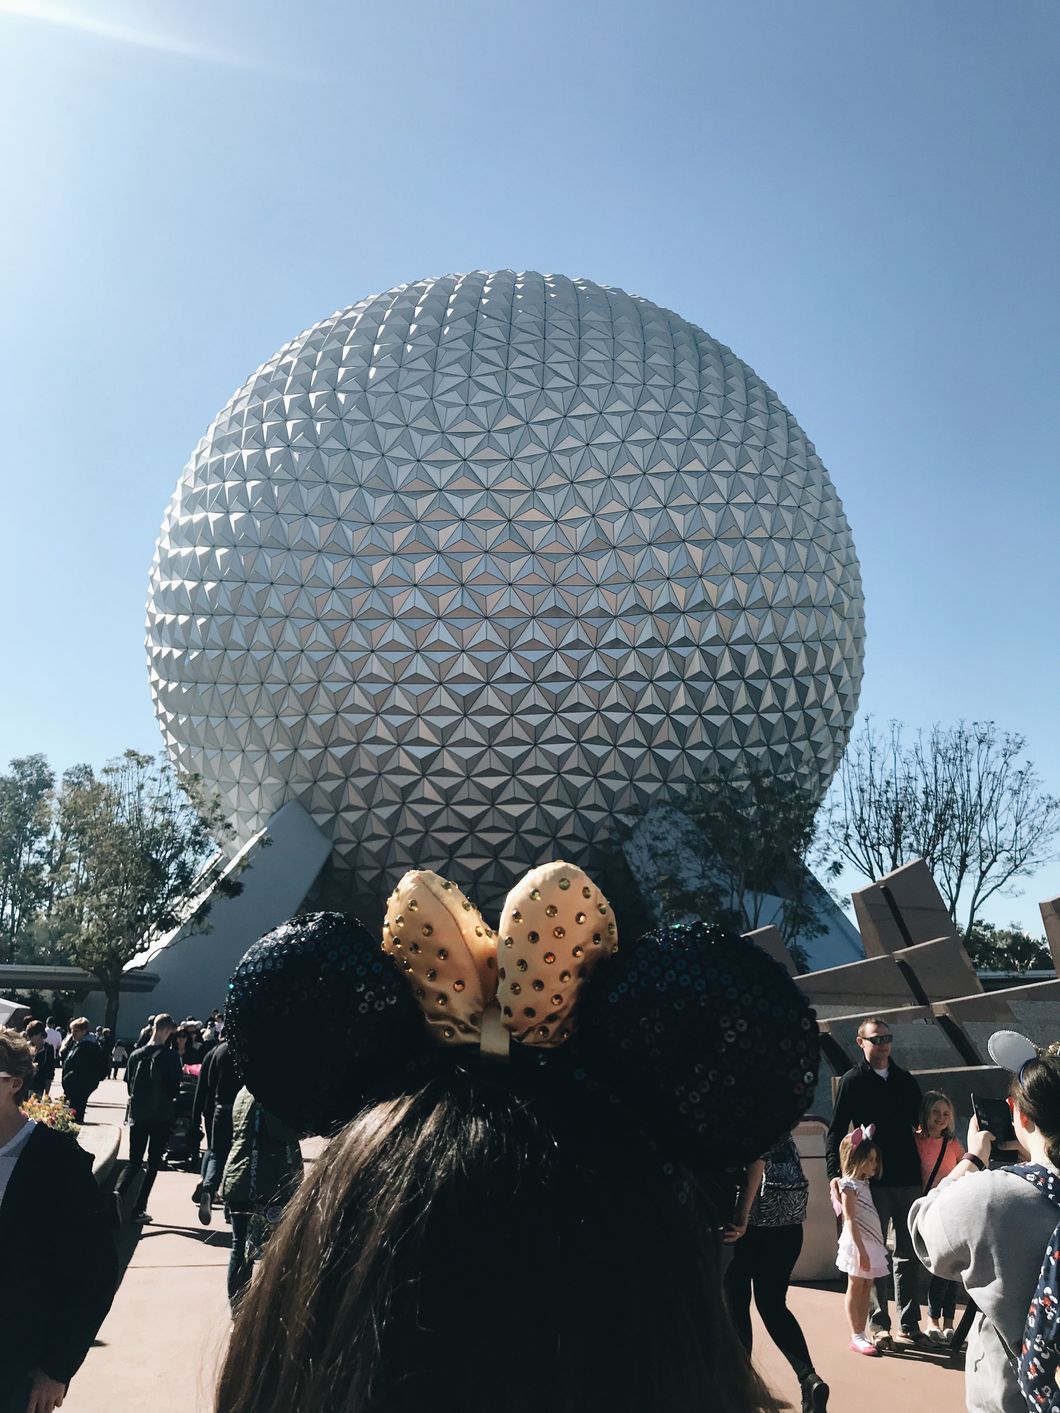 A Magical Day at Disney World, As Described By Disney GIFs